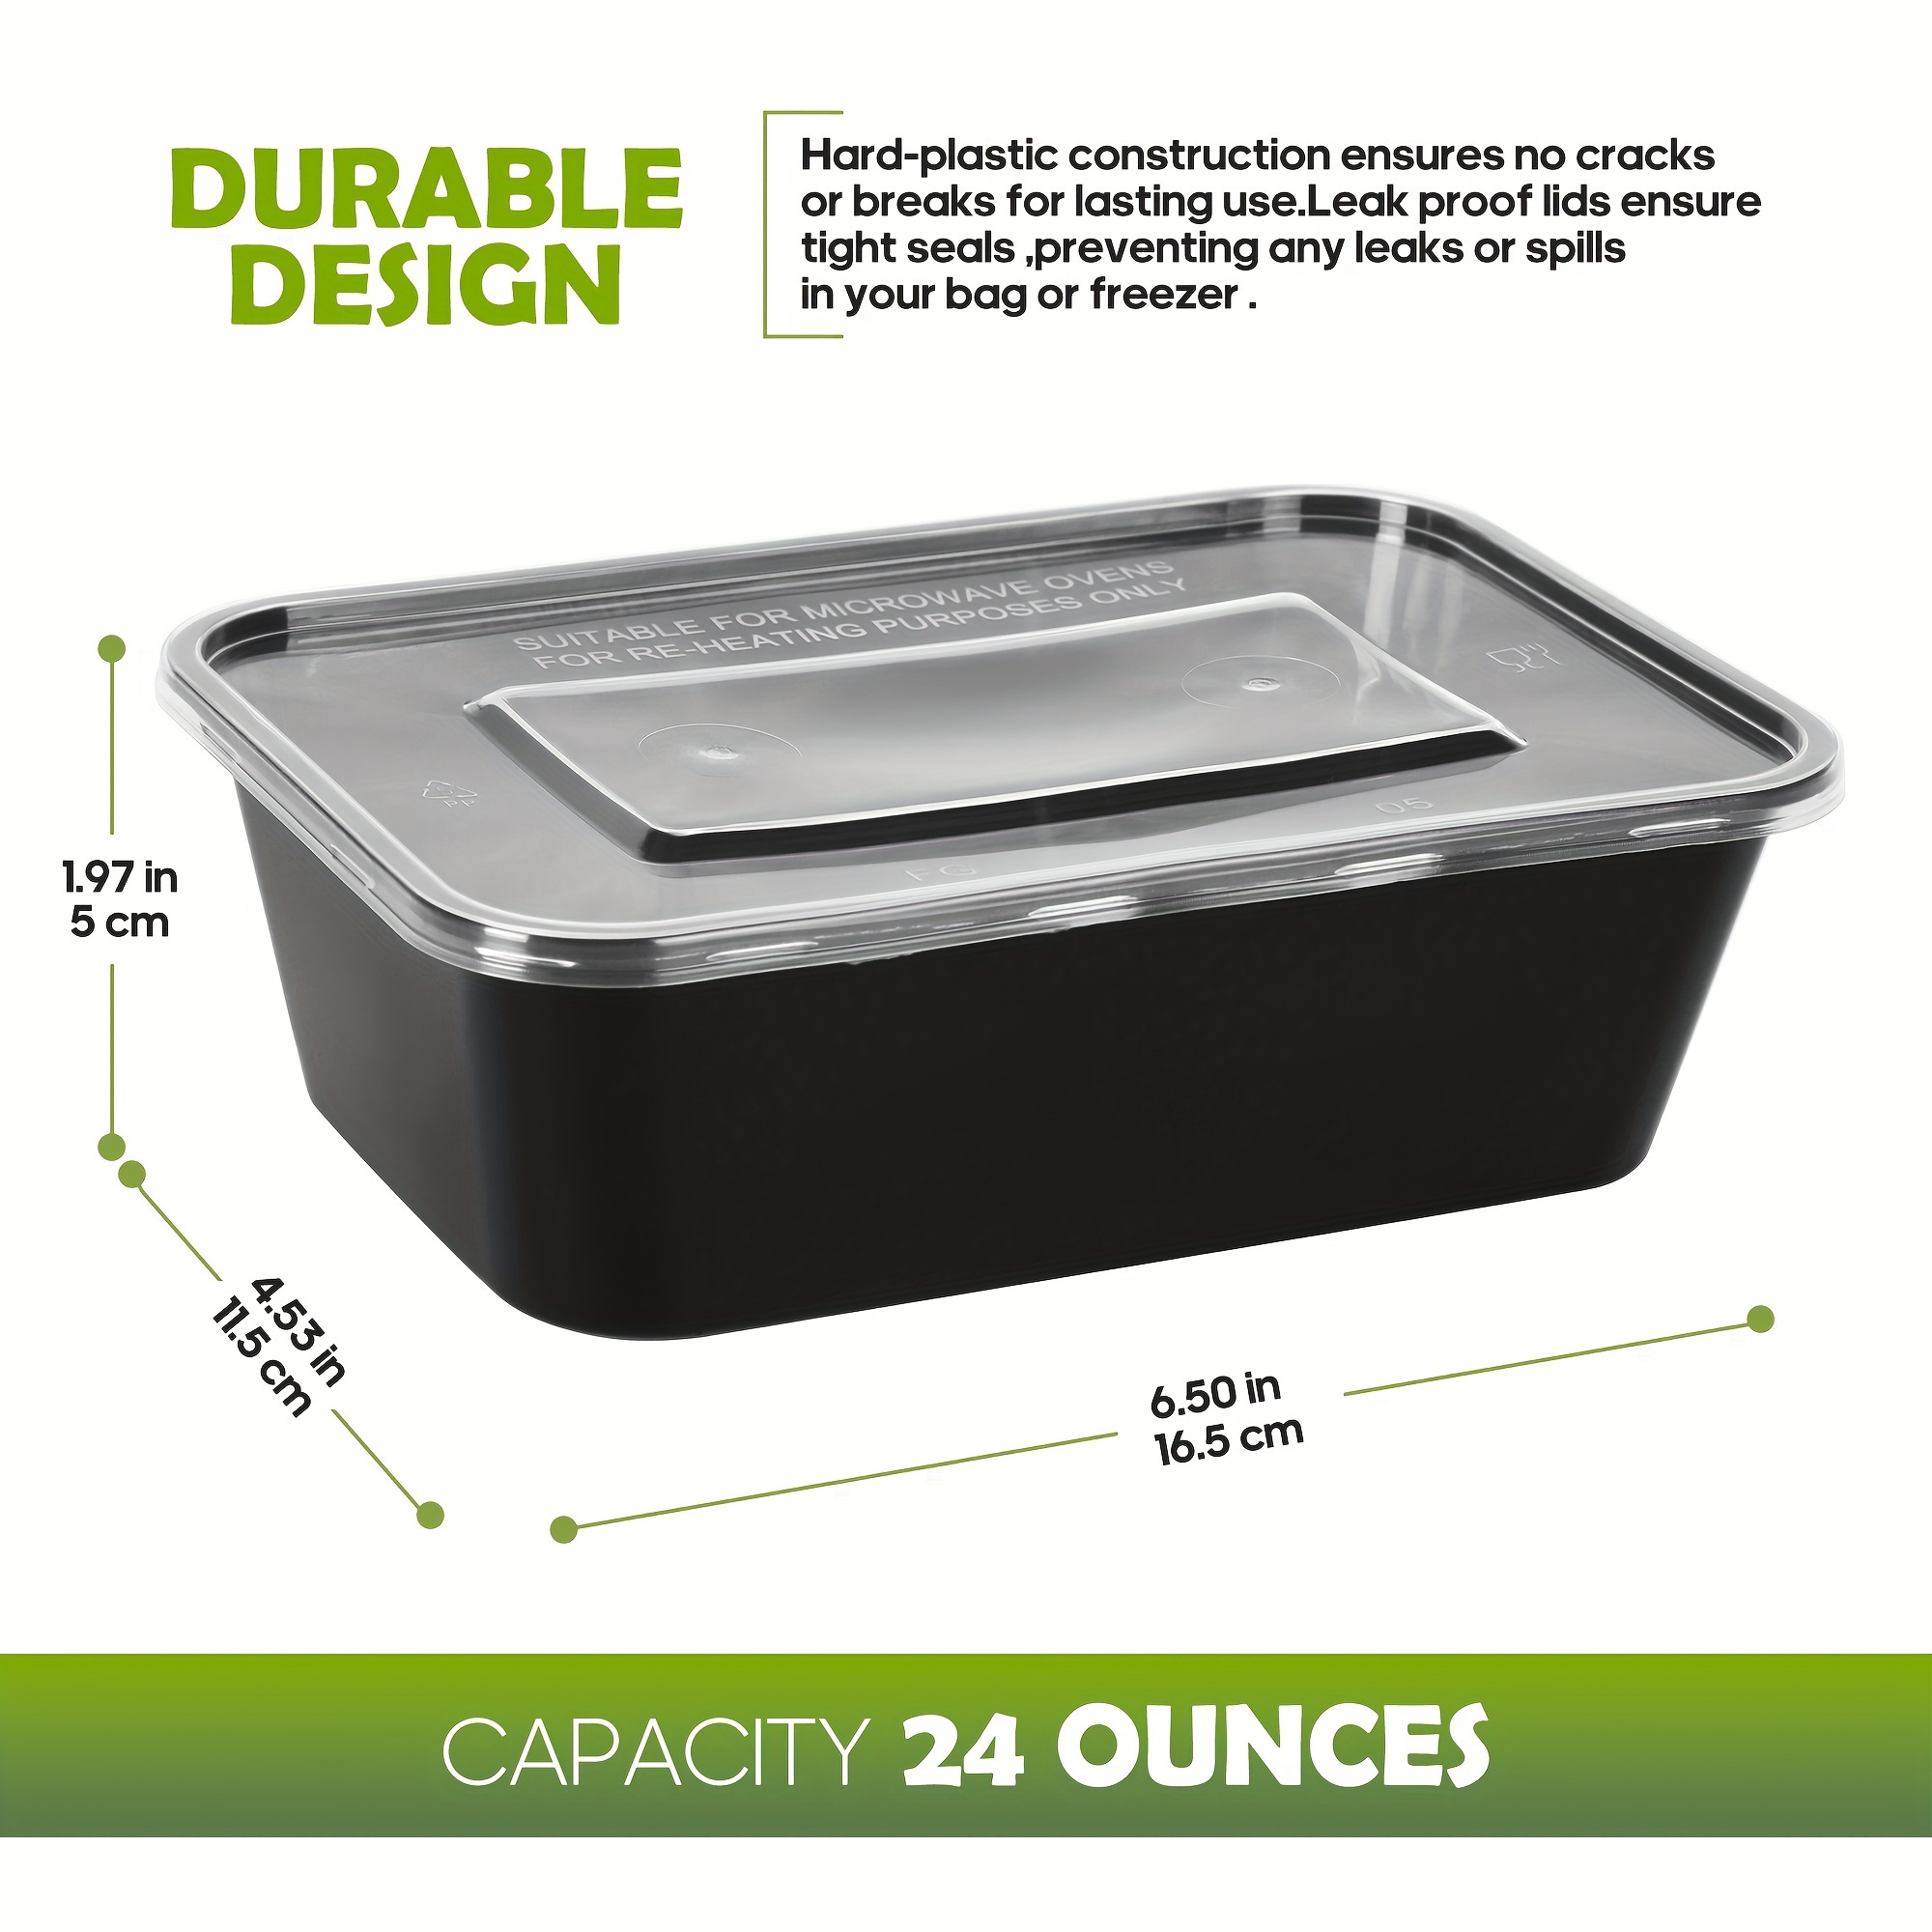 Repurposed Kitchen Organization: Use Food Storage Containers Without Lids